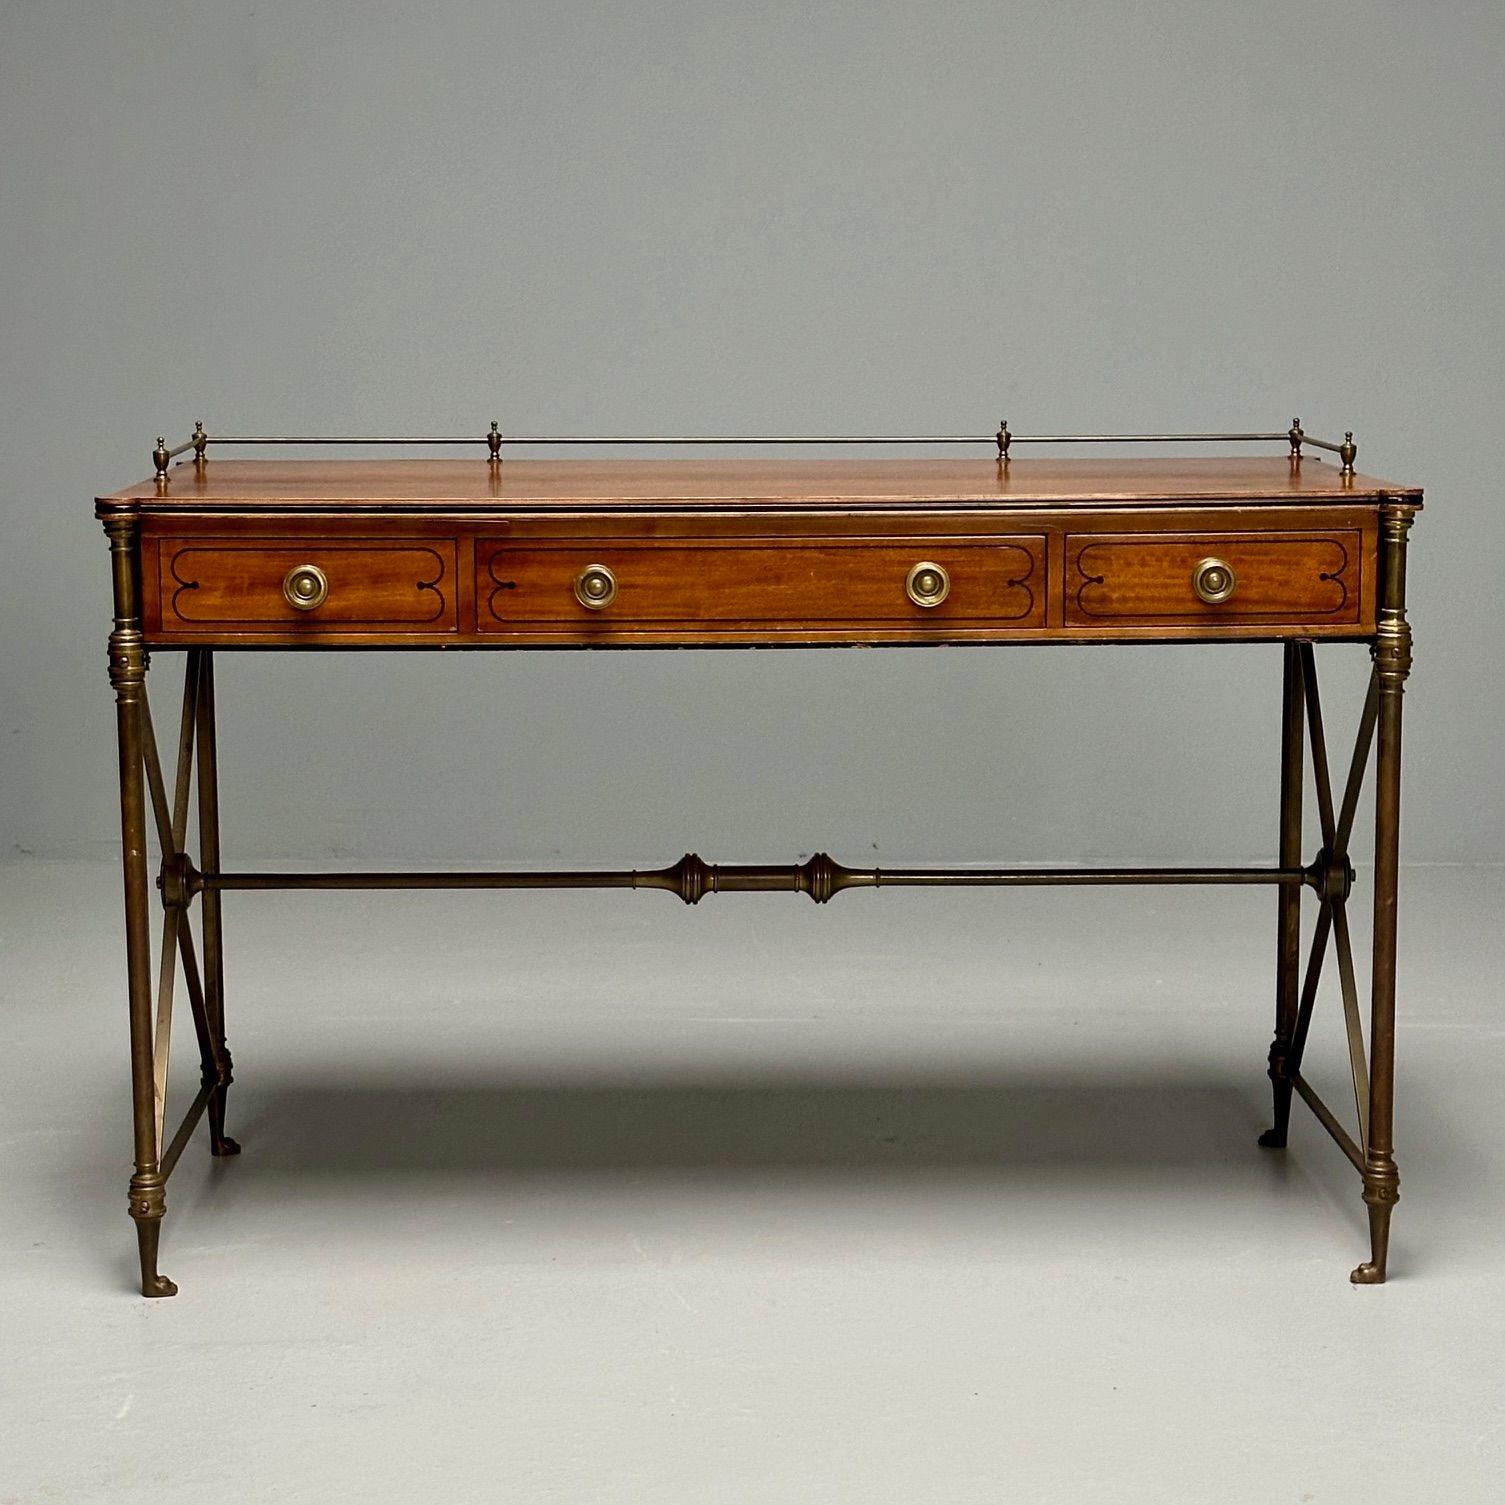 Mid-20th Century Kittinger, English Regency, Campaign Desk, Rosewood, Satinwood, Brass, USA 1950s For Sale